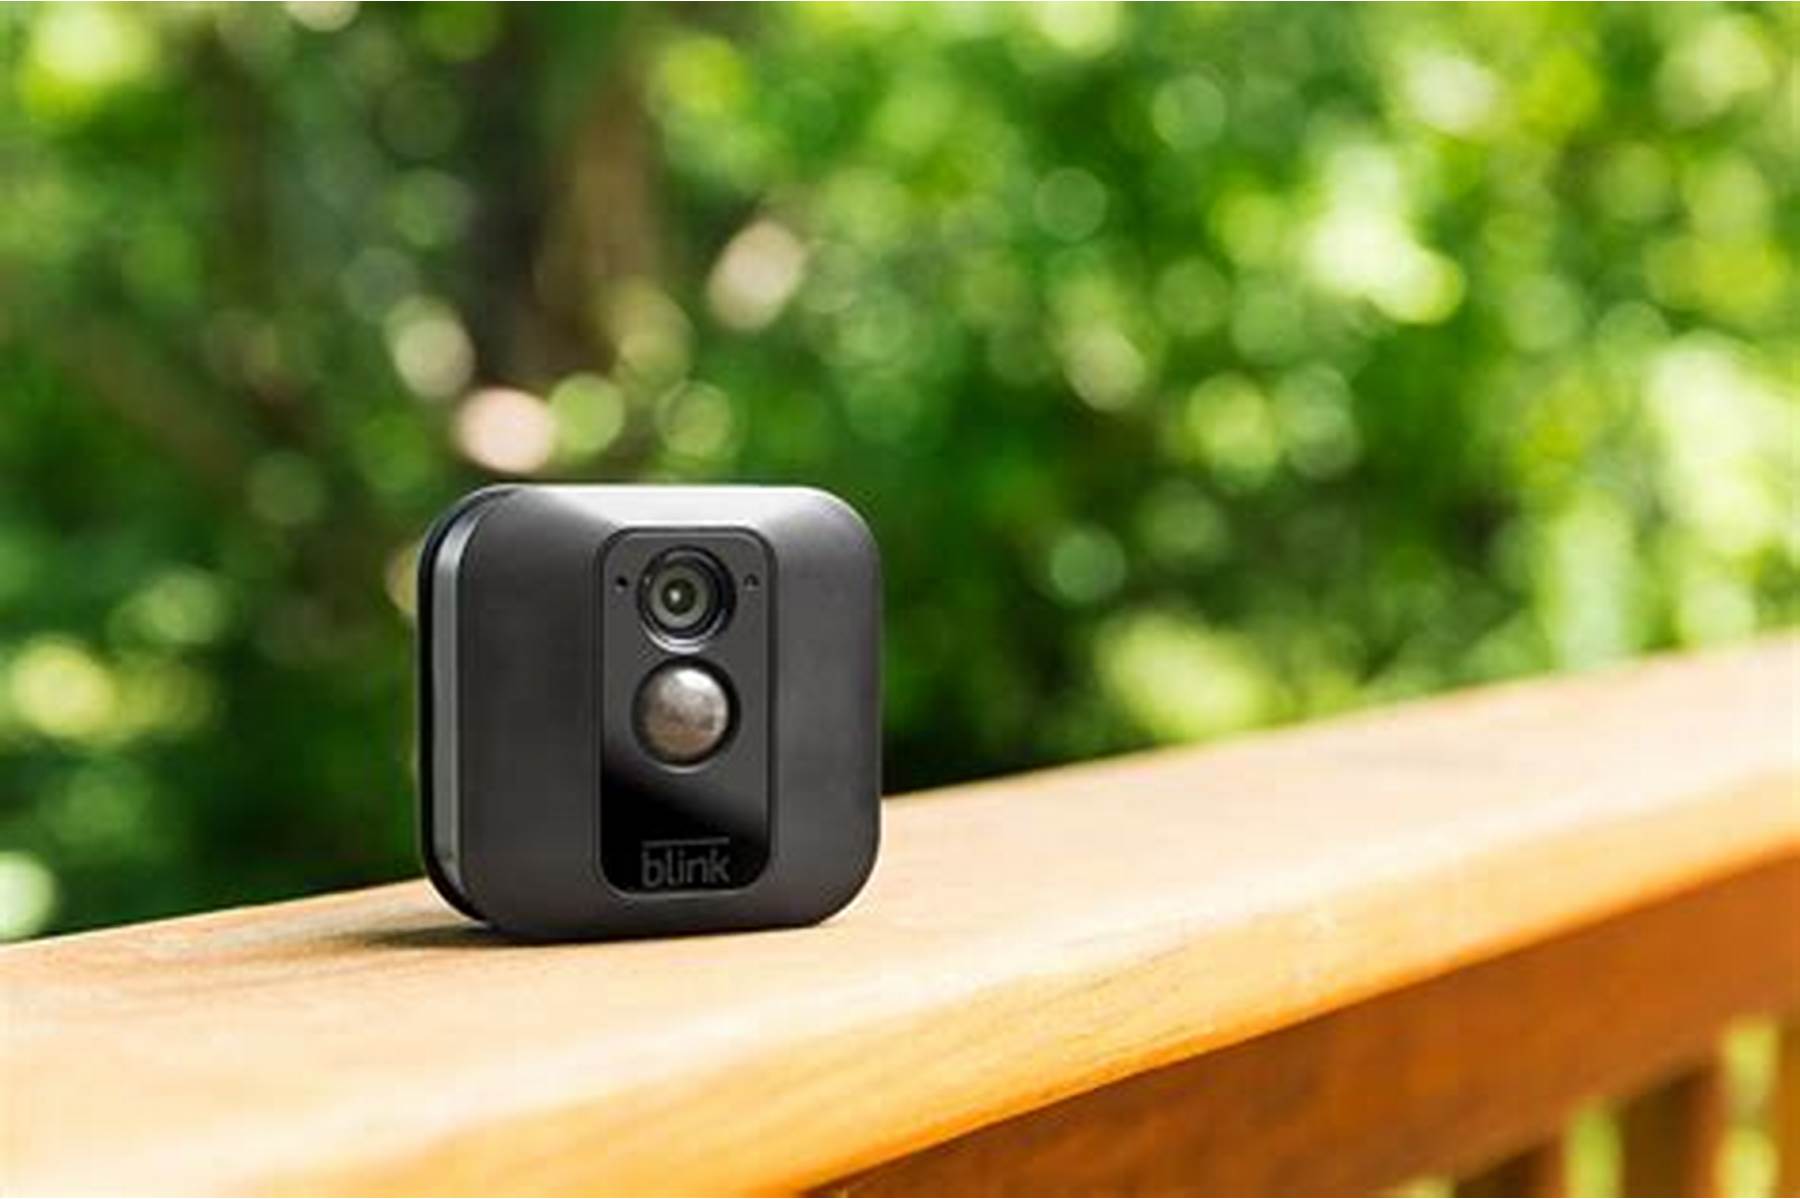 Blink Wireless Cameras Smart and Seamless Home Monitoring Made Easy